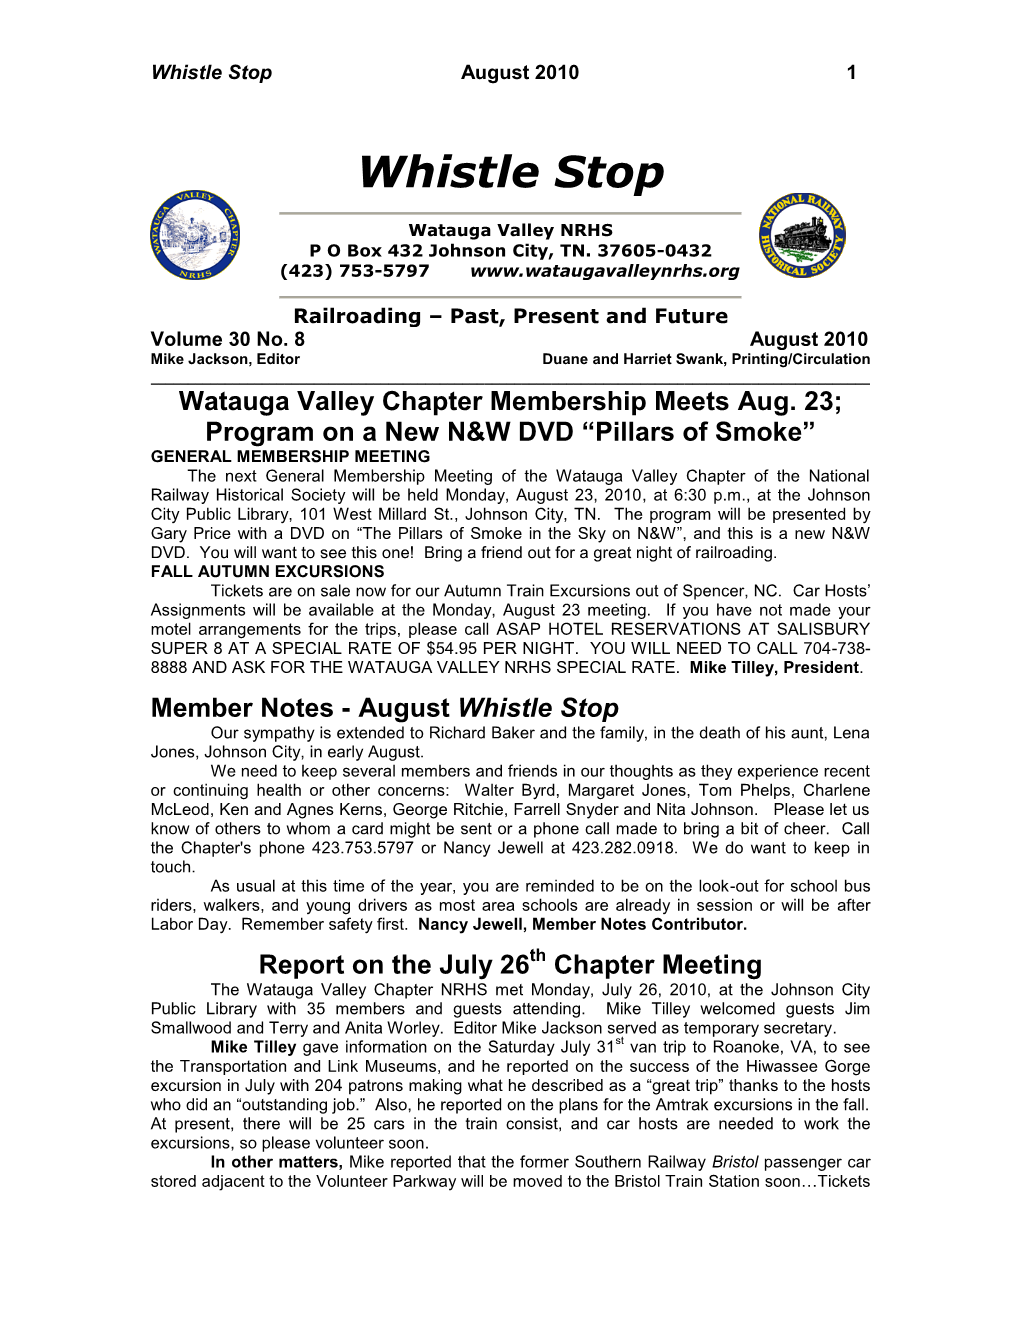 August Whistle Stop Our Sympathy Is Extended to Richard Baker and the Family, in the Death of His Aunt, Lena Jones, Johnson City, in Early August